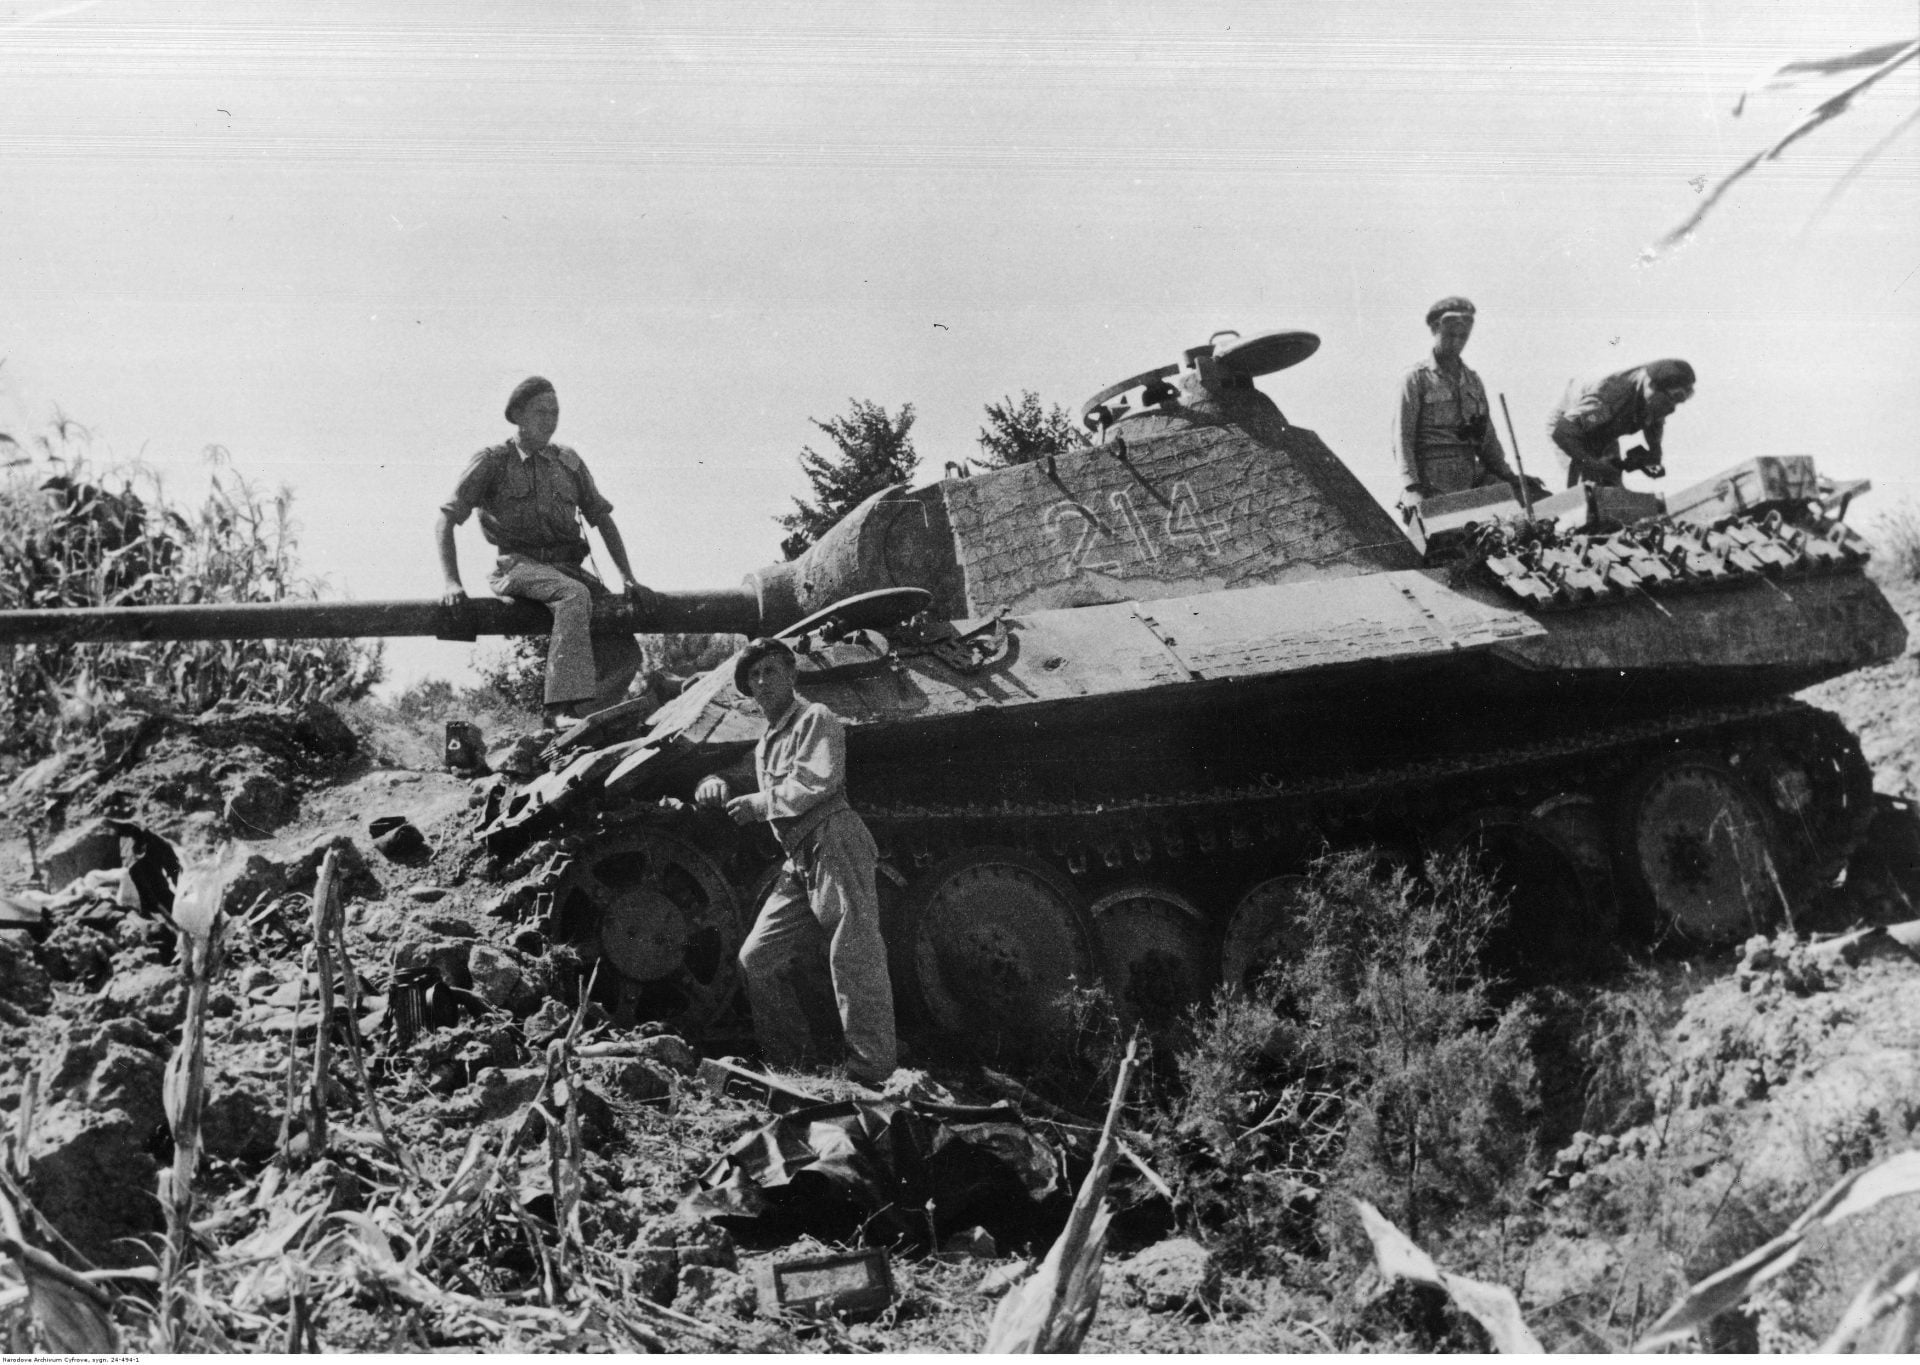 PzKpfw V Sd Kfz 171 Panther tank captured by soldiers